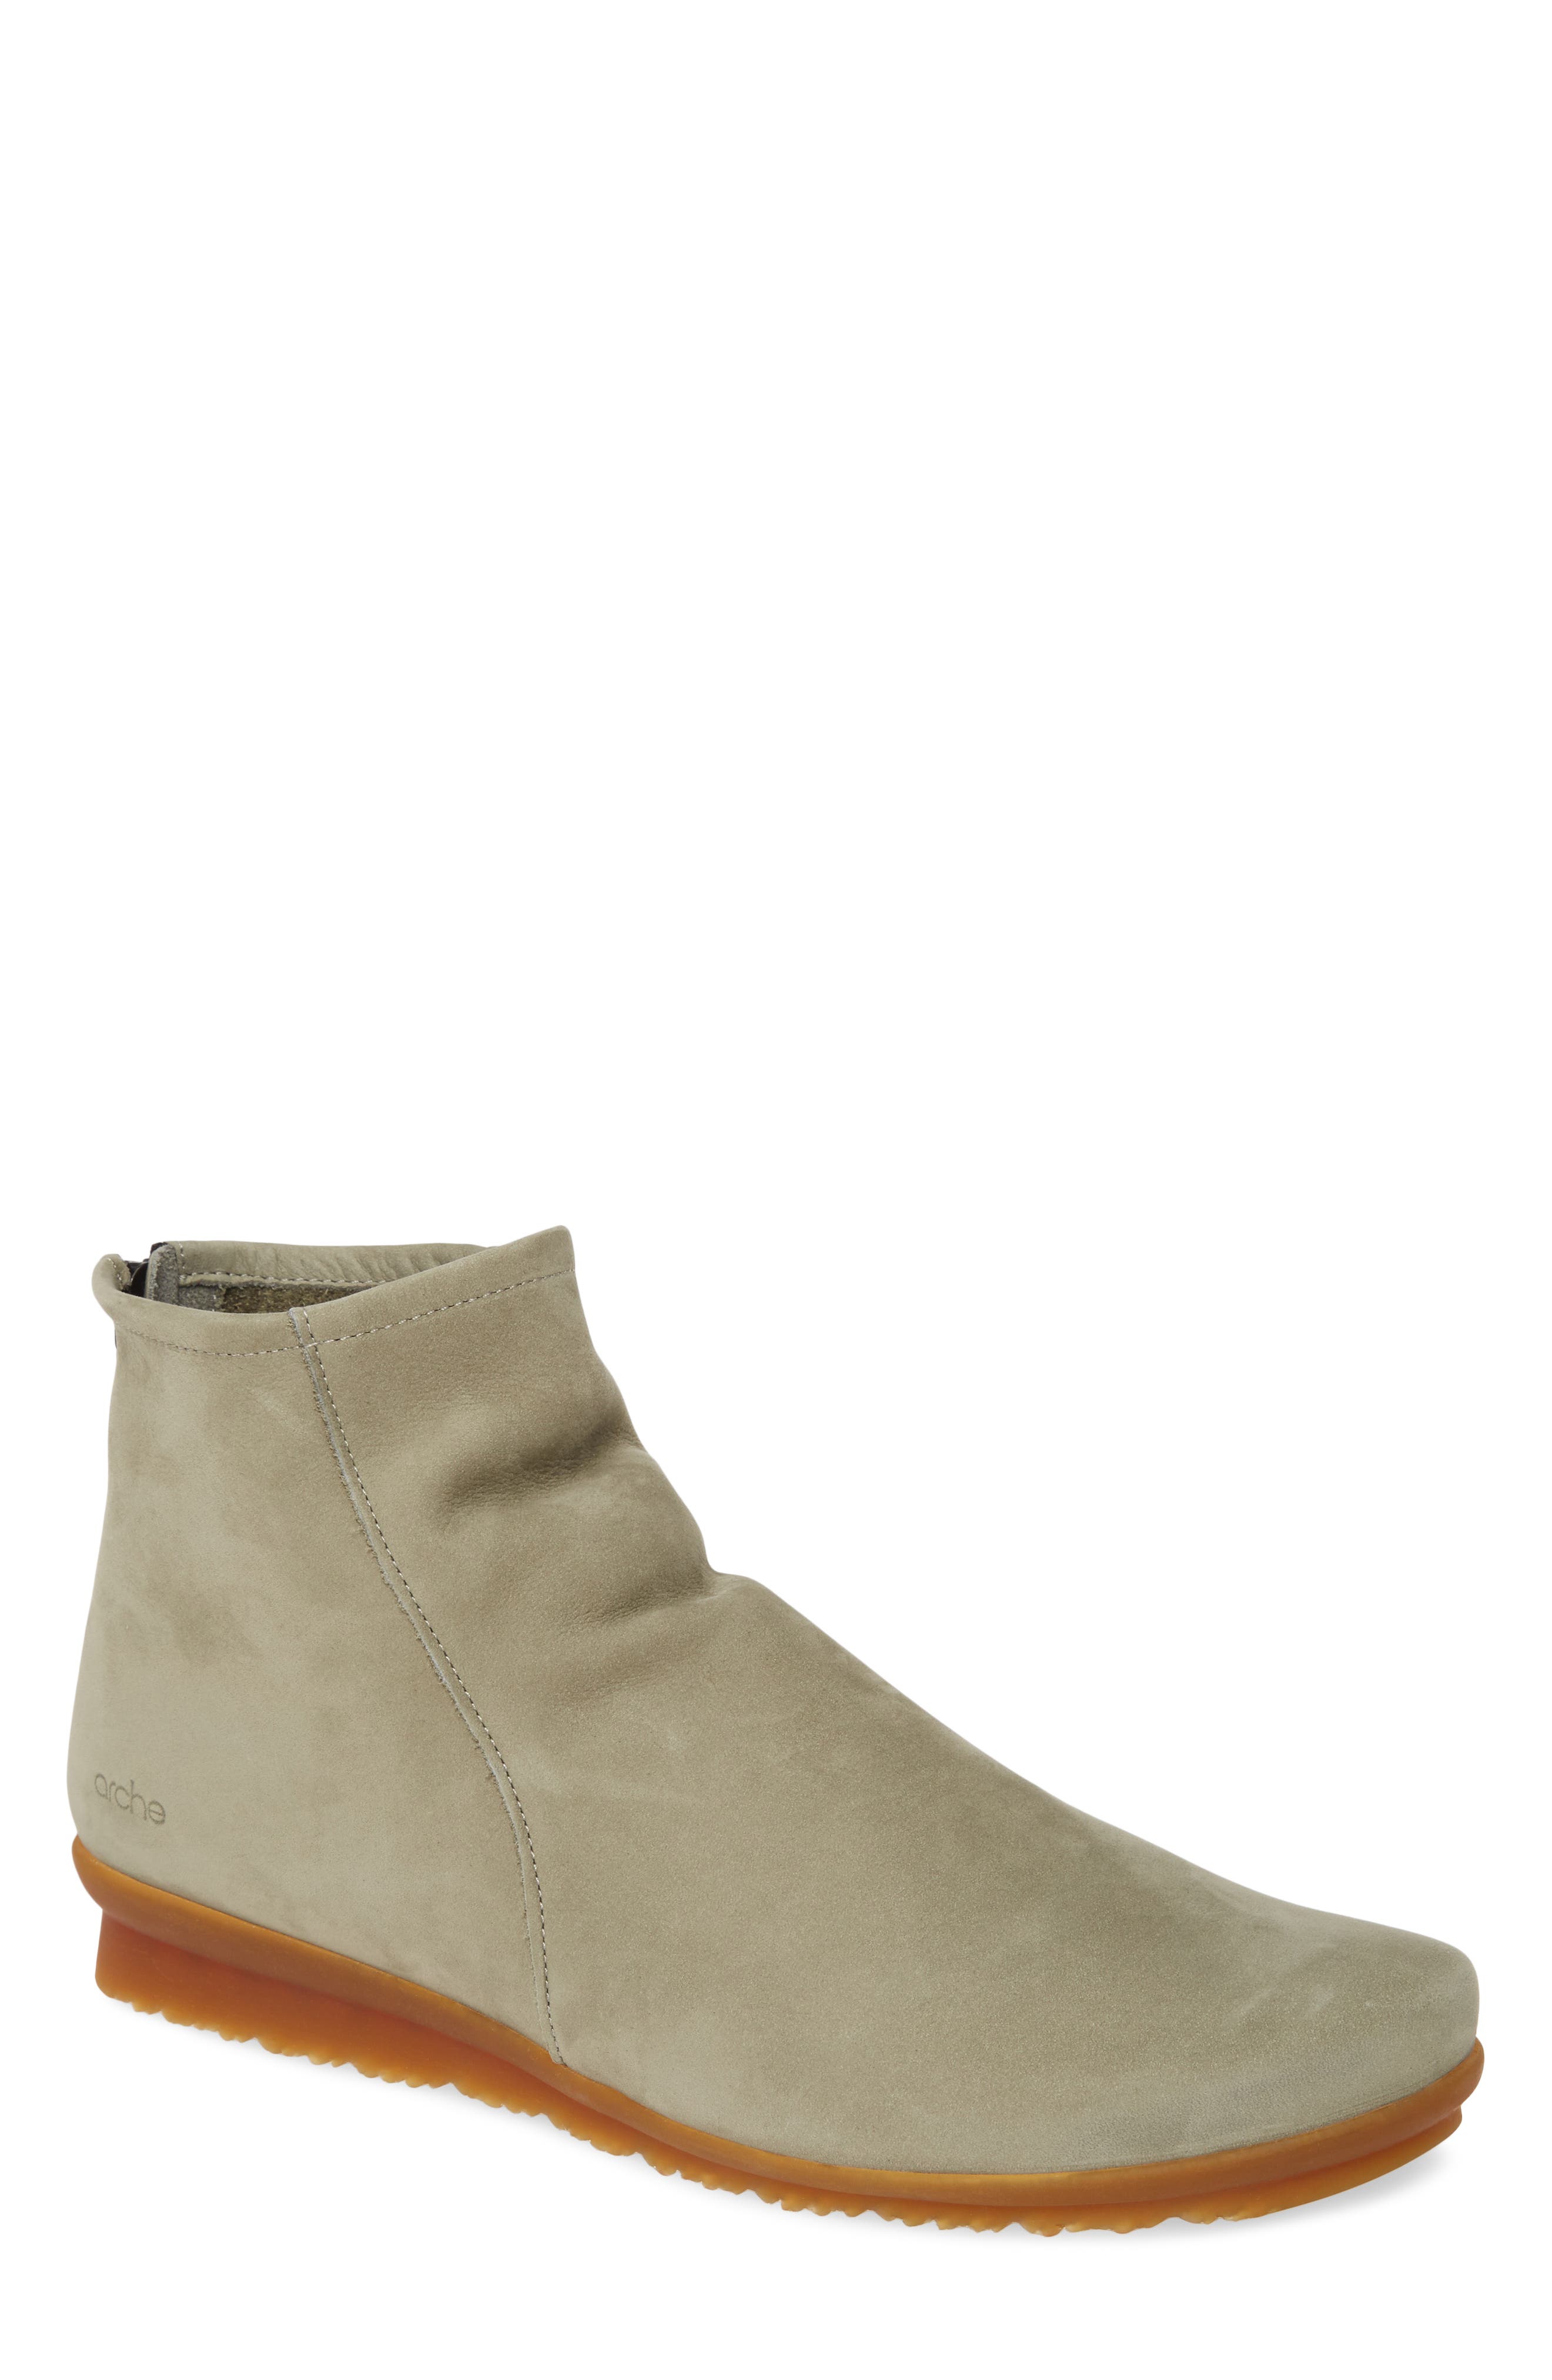 Women's Arche Booties \u0026 Ankle Boots 